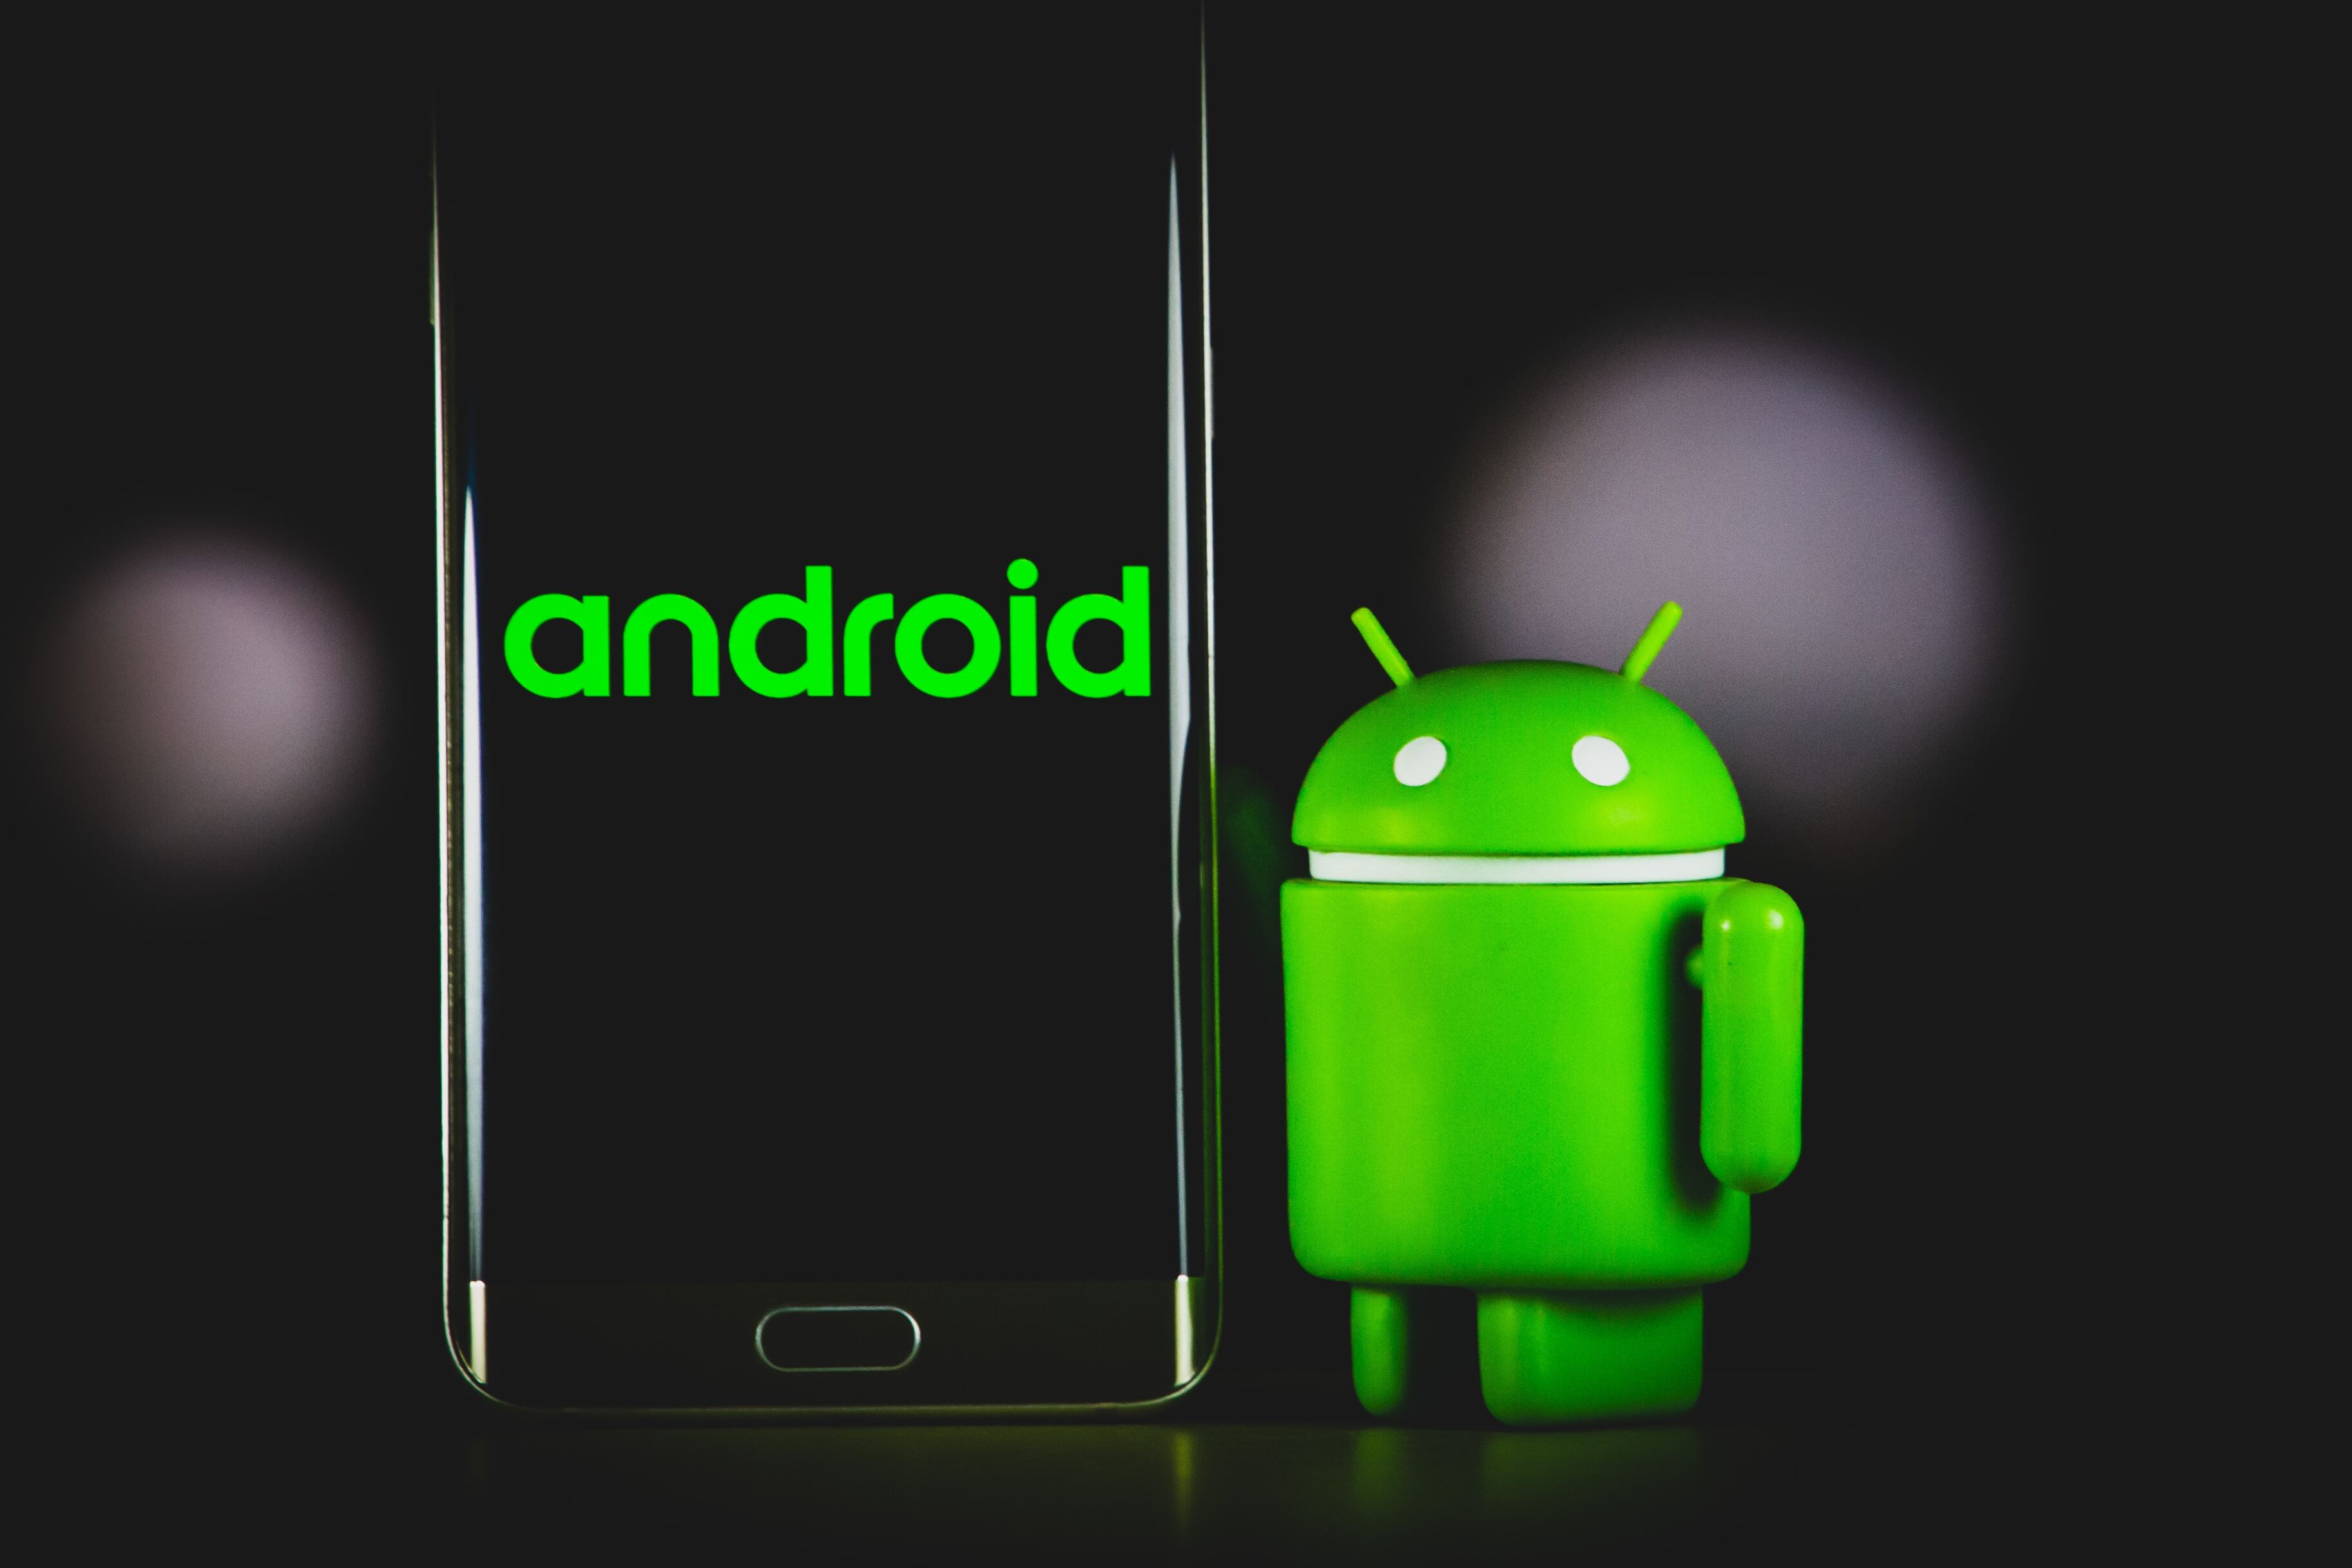    android-  